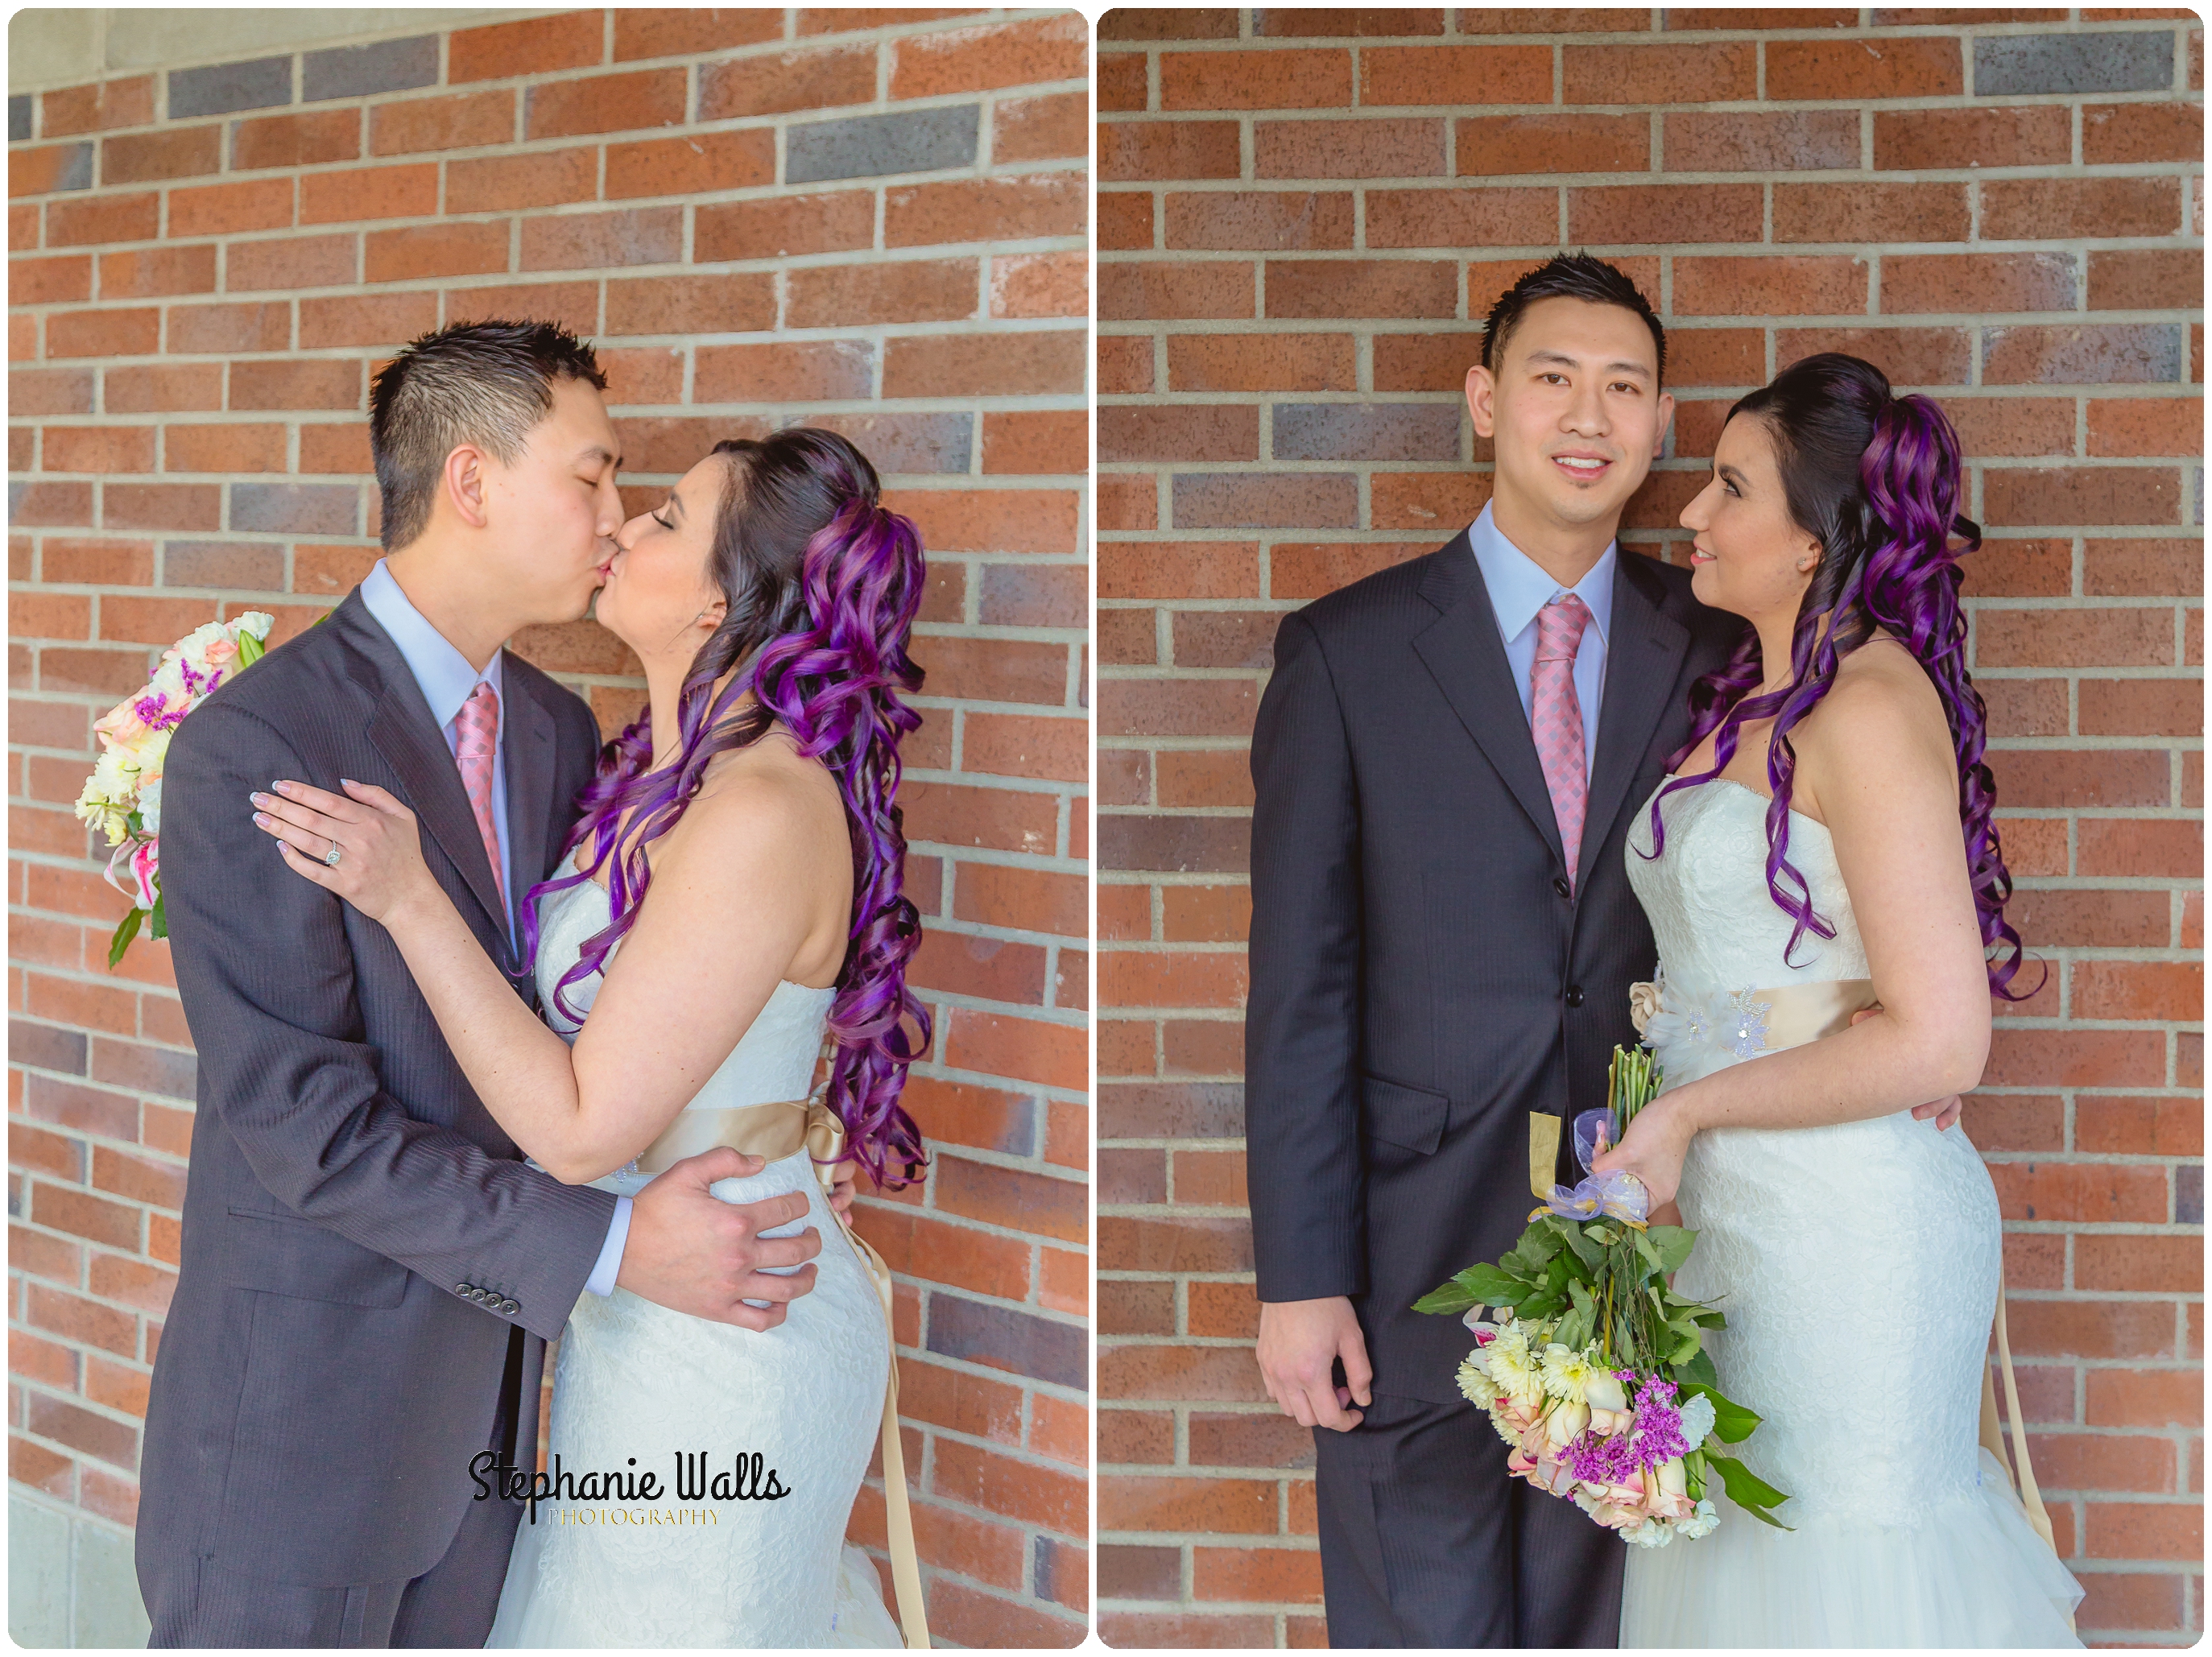 Chan Wedding 007 1 LAUGHTER AND LACE | BOTHELL COURTHOUSE WEDDING BOTHELL WA